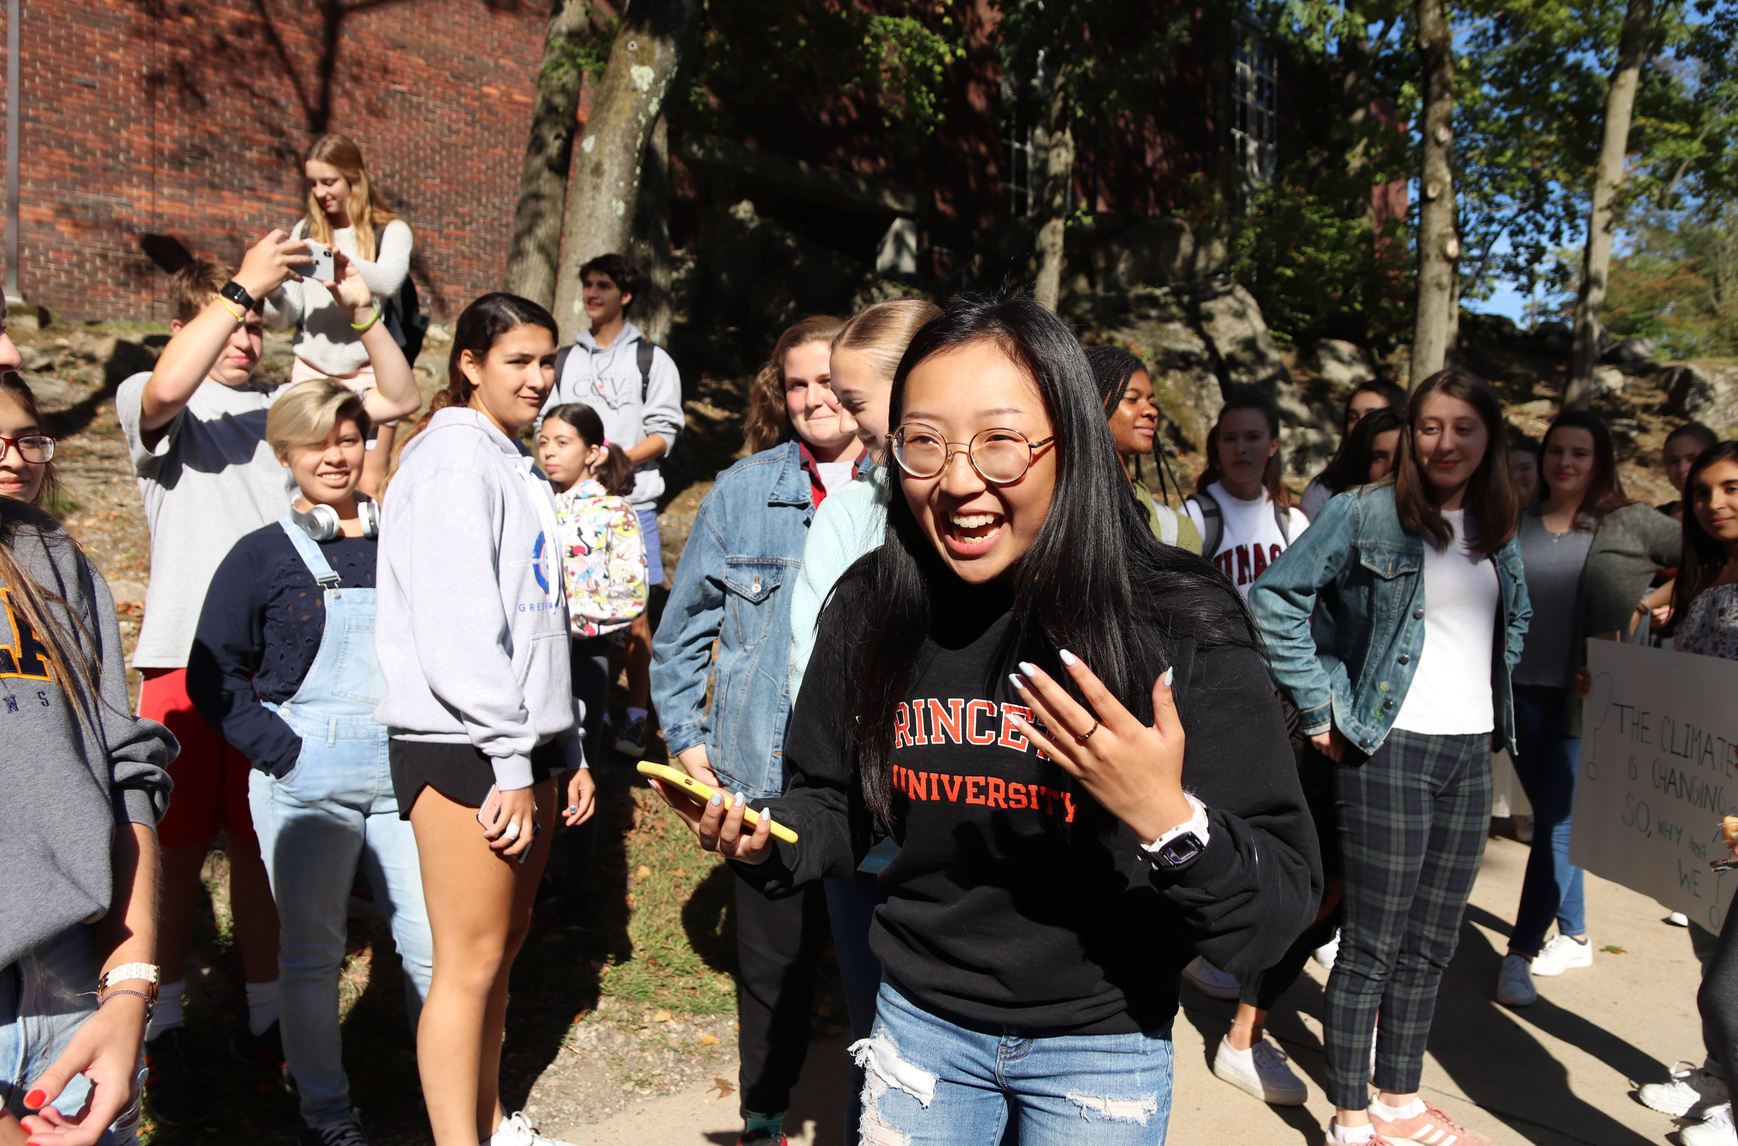 During a student walk out on Friday, Victoria Fu urged students to use their voices to demand action on climate change. Sept 19, 2019 Photo: Leslie Yager